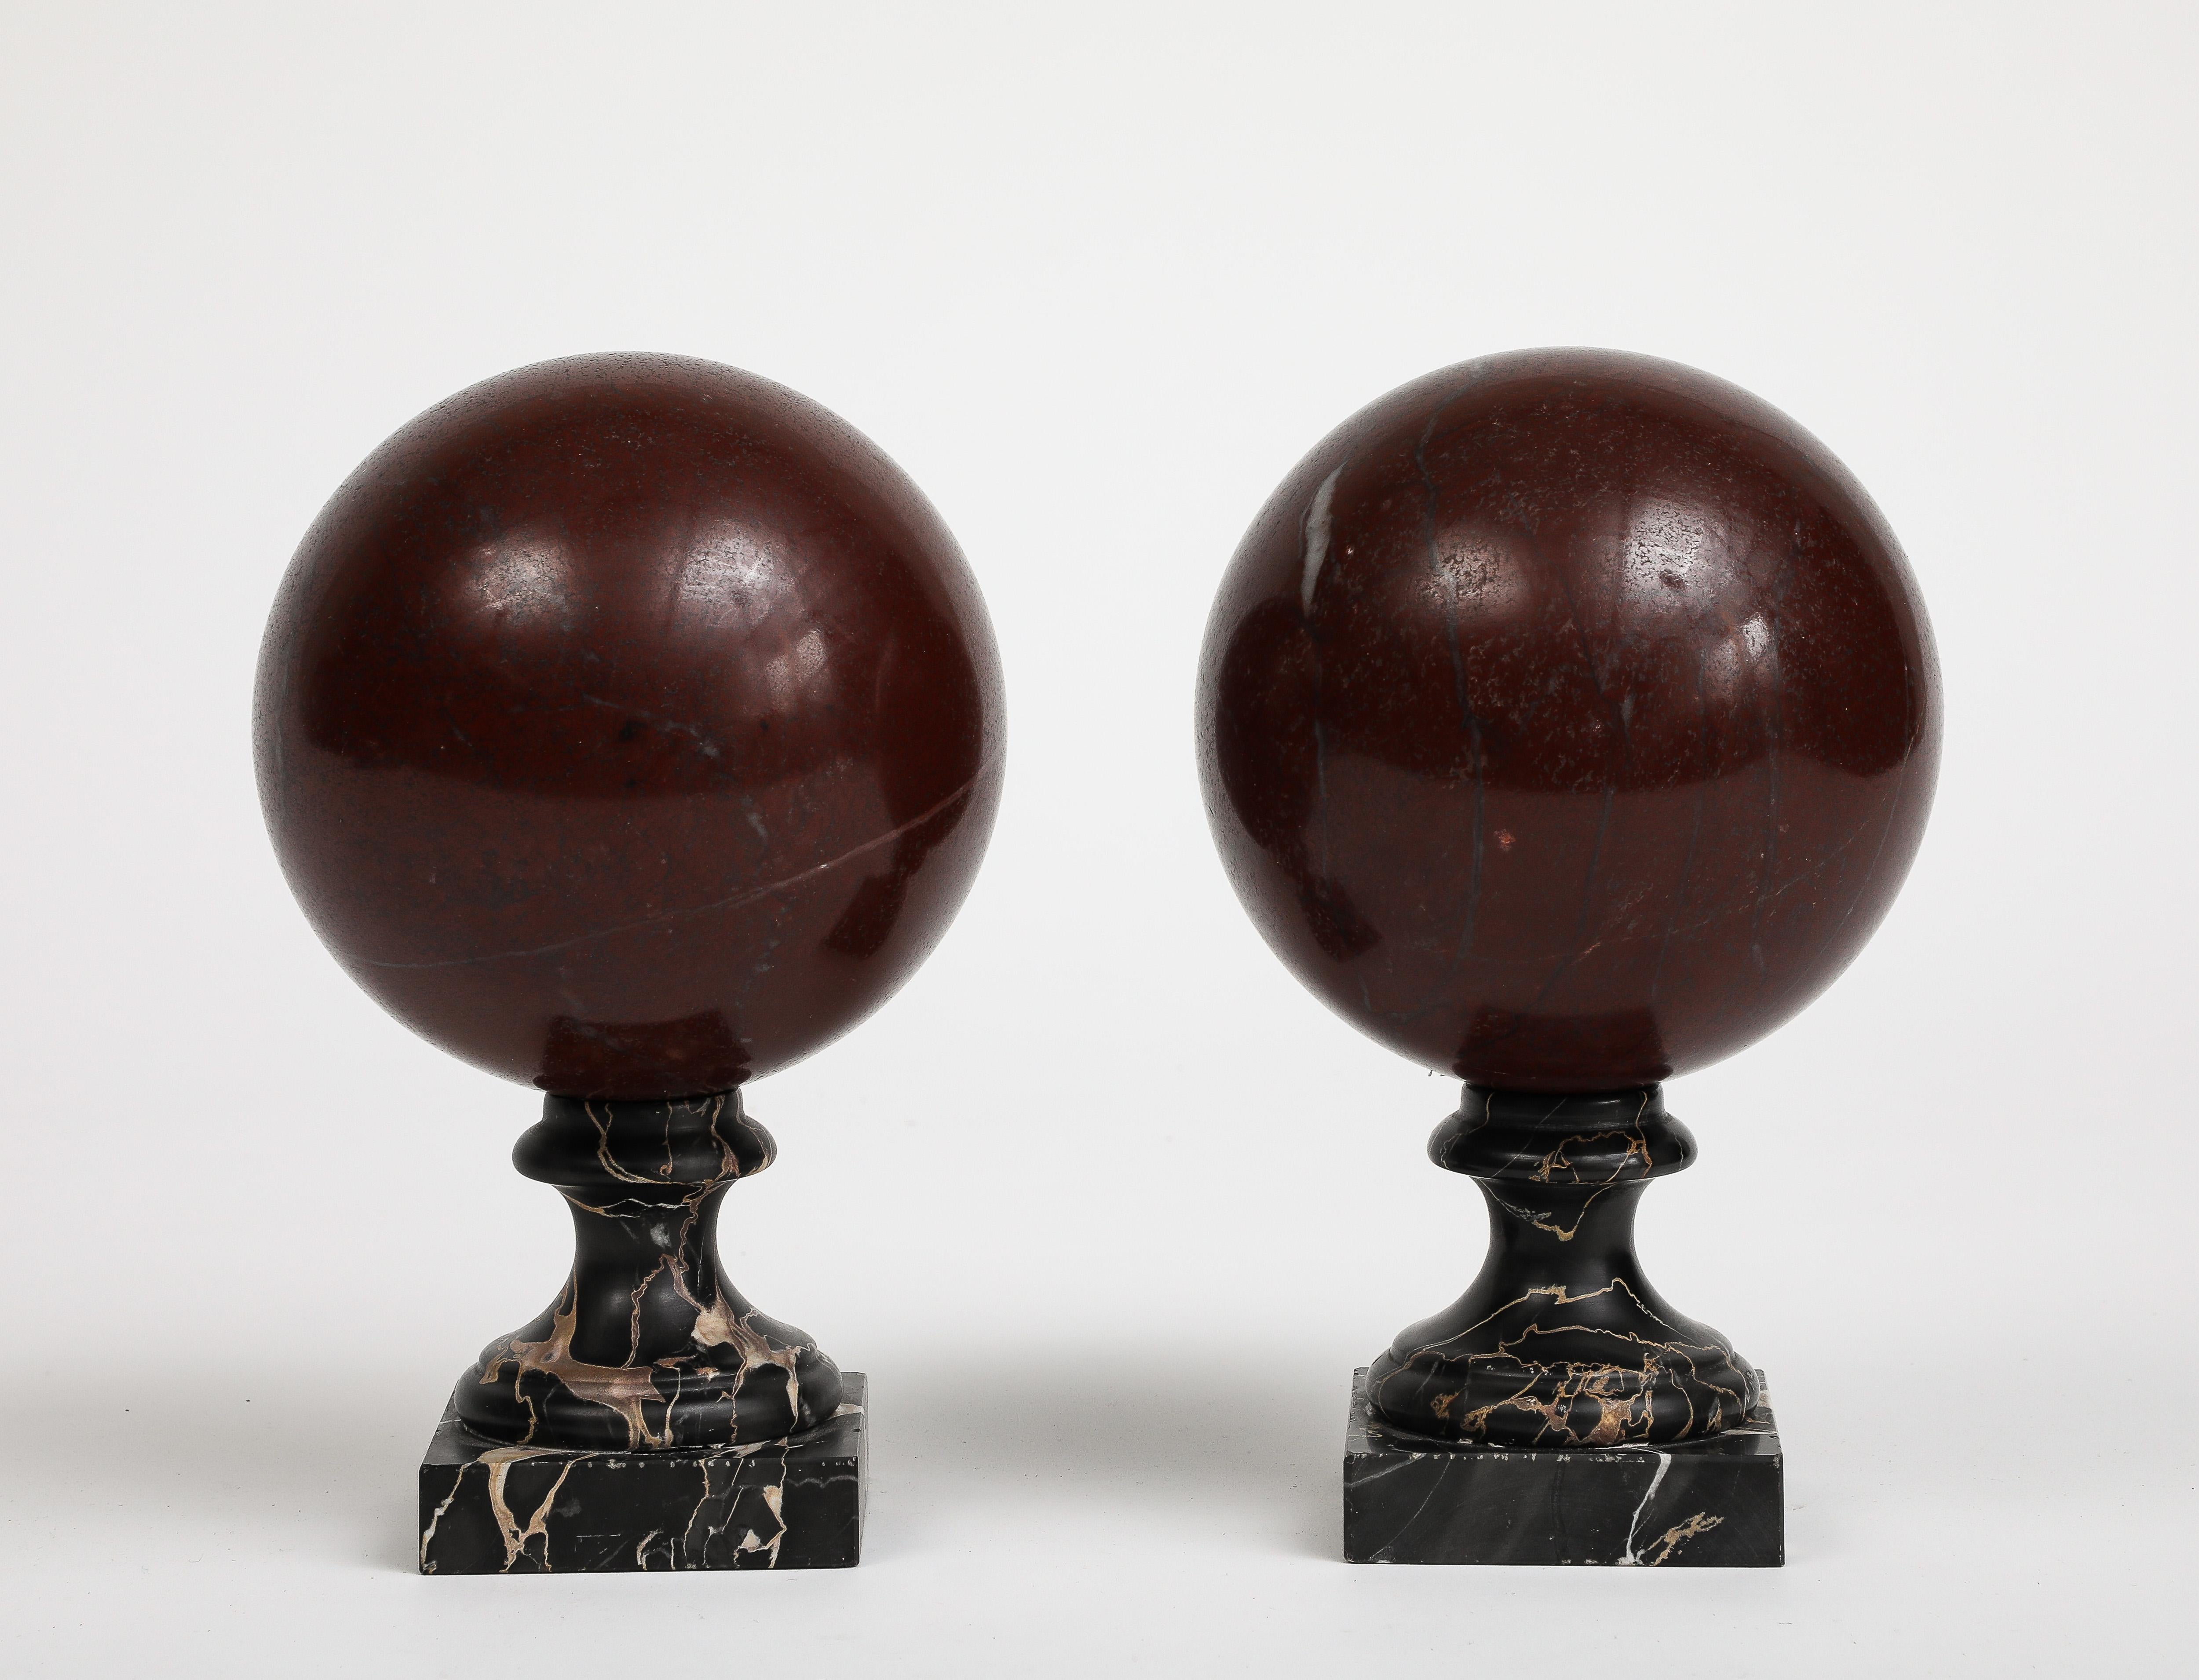 Pair of 19th century red marble spheres on black marble stands; the spheres are not attached to the bases. 
Base alone is 3.25